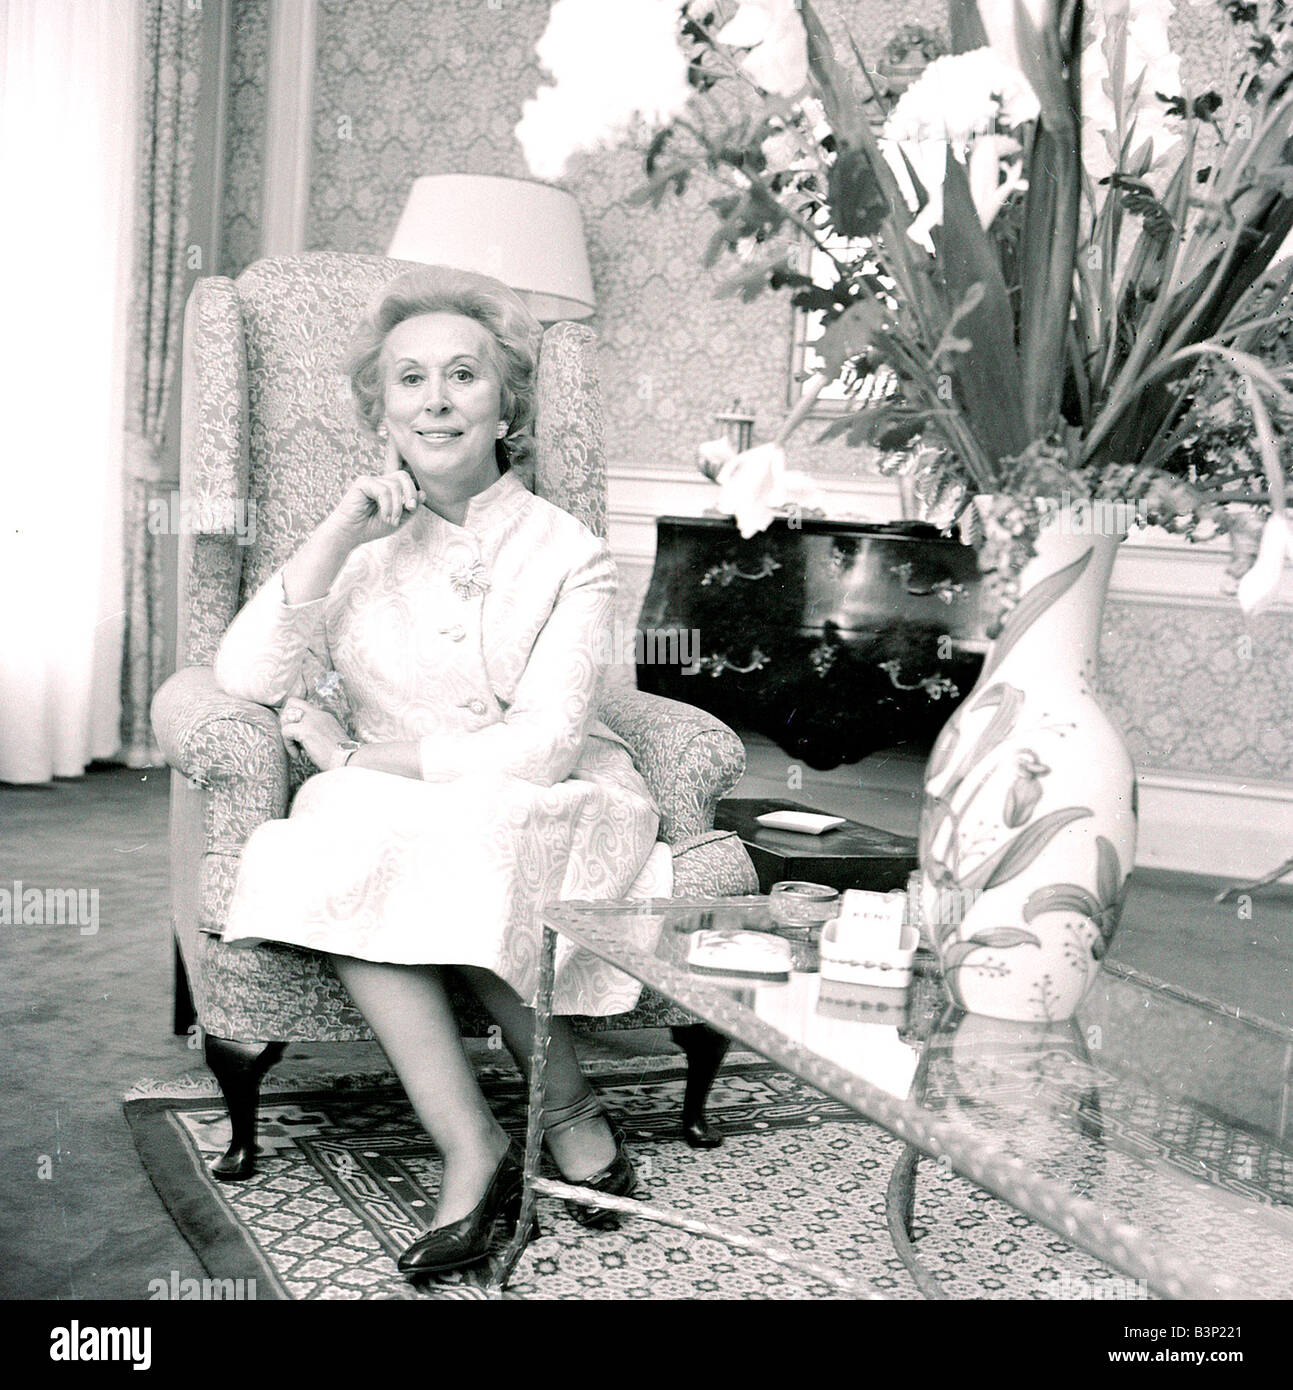 Estee lauder family hi-res stock photography and images - Alamy